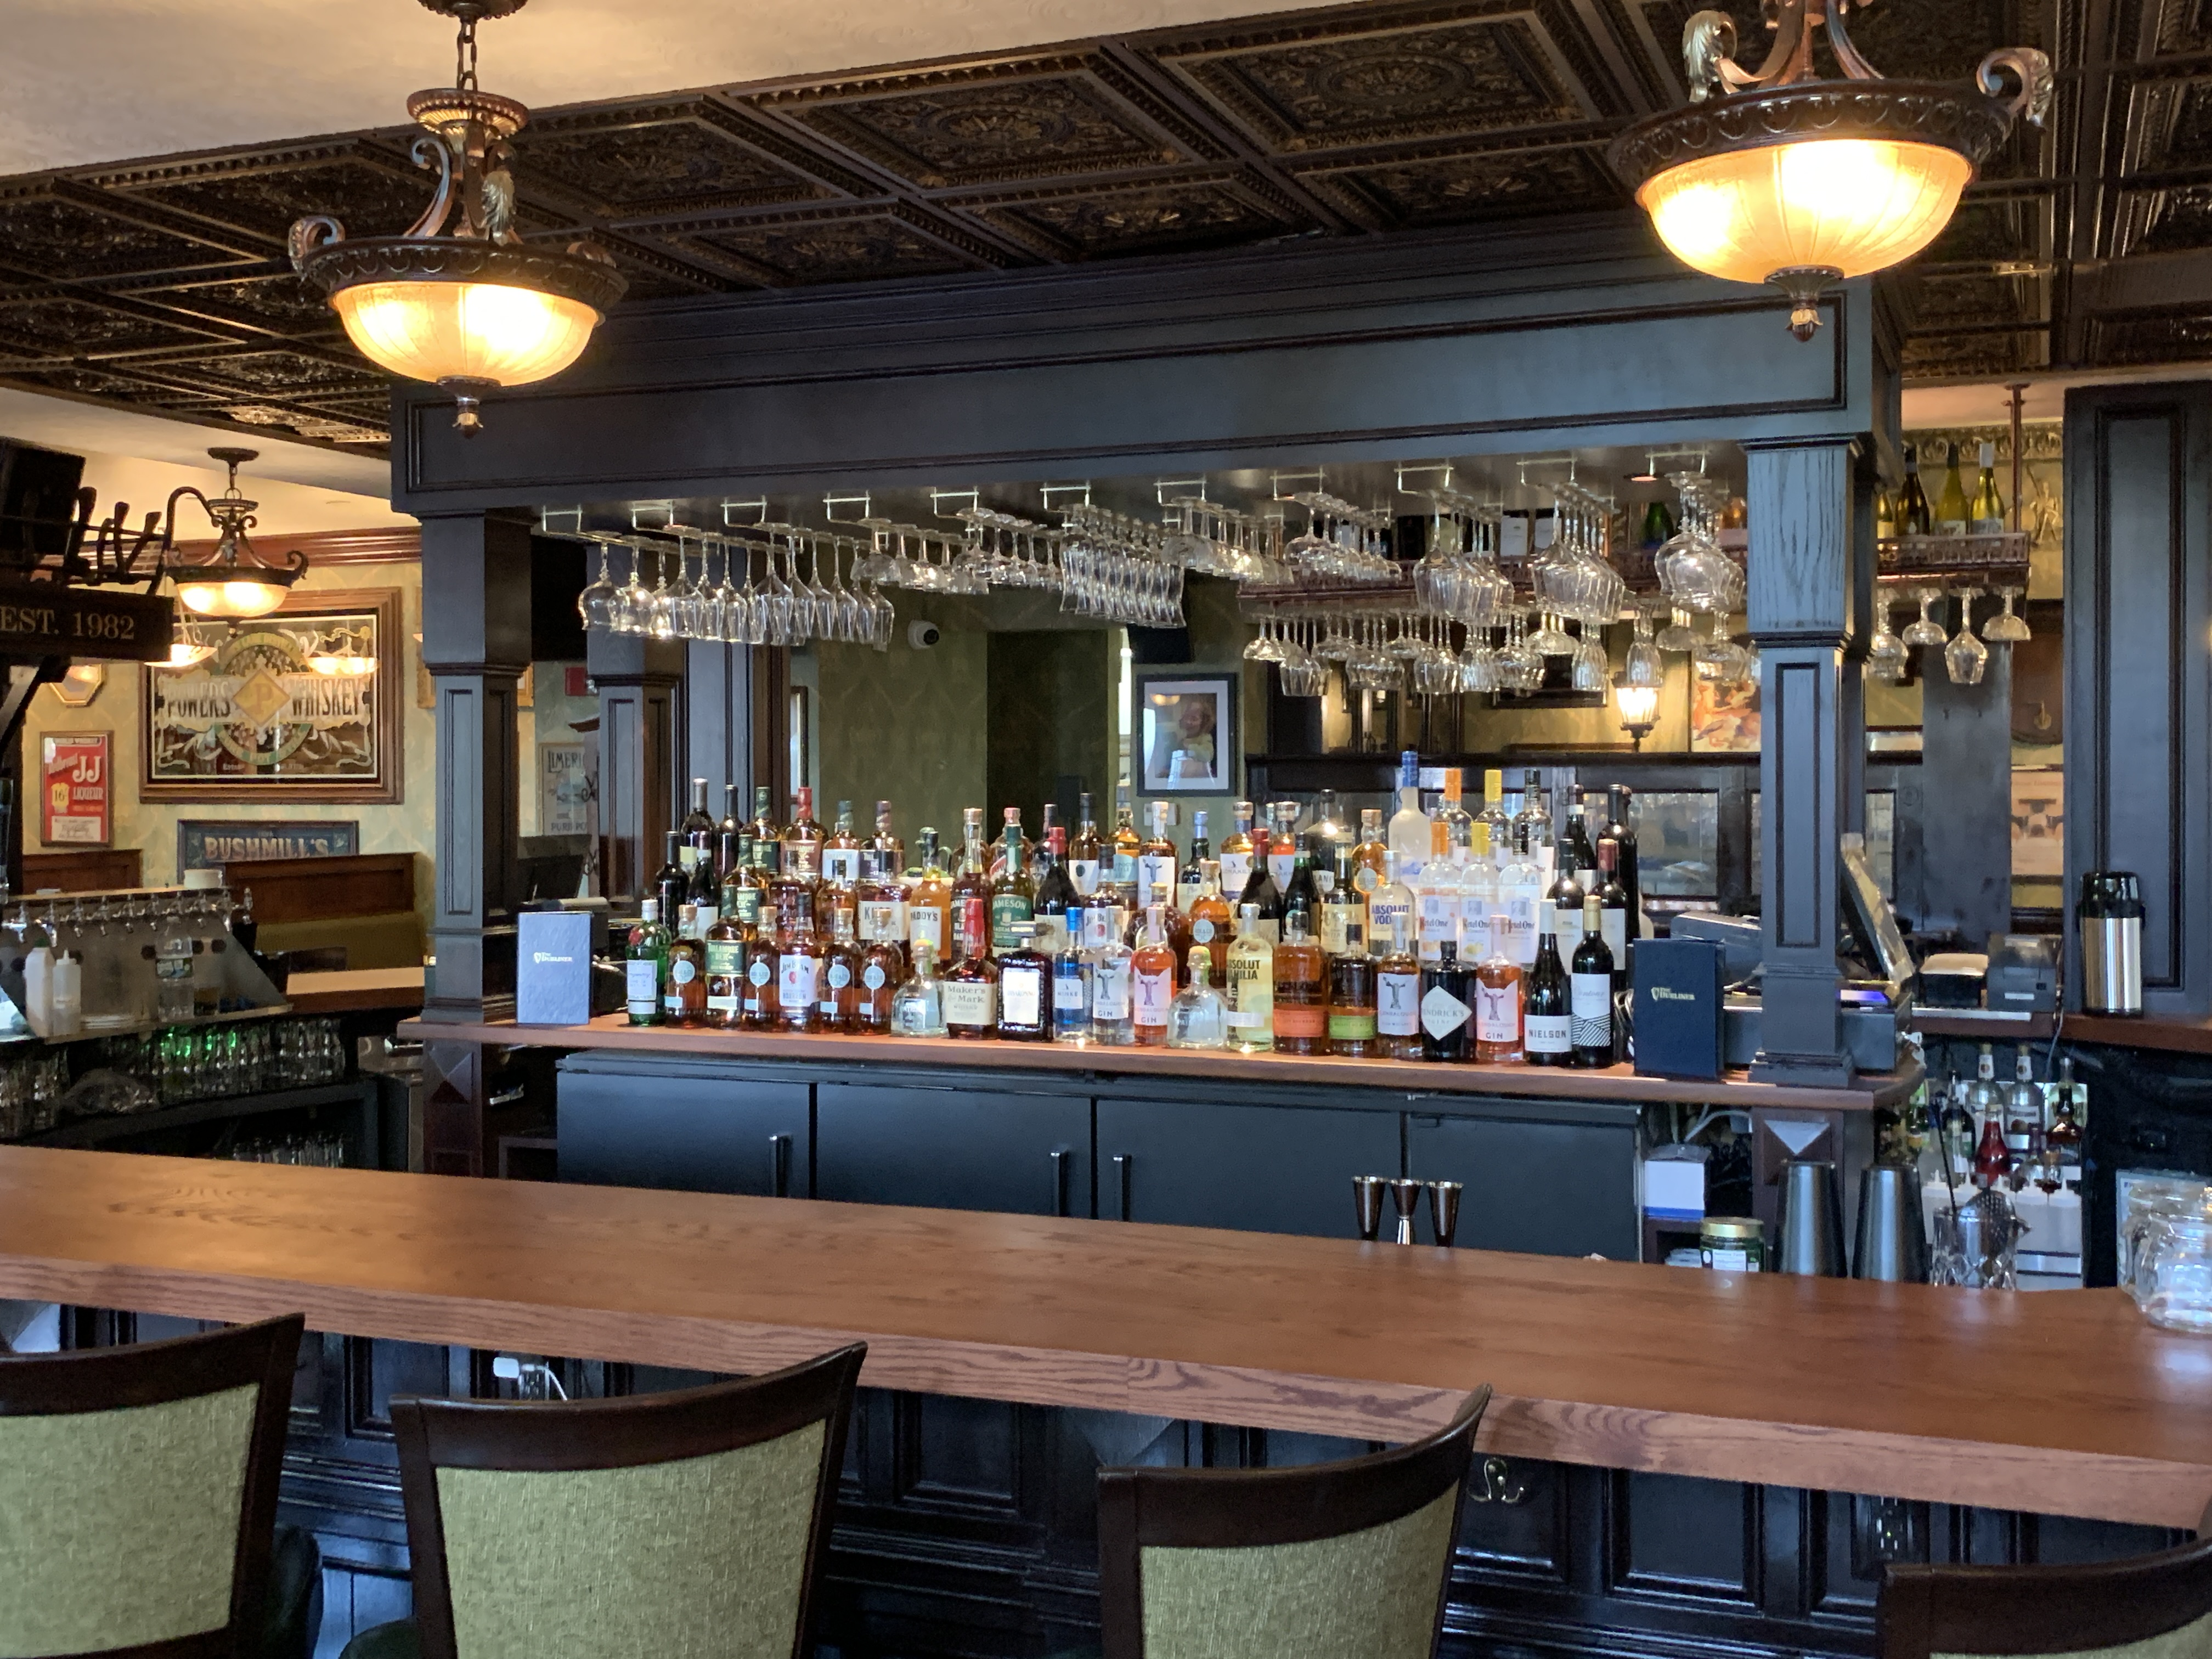 A bar with empty barstools lined against a wooden countertop and liquor bottles lining the back wall behind the bar.